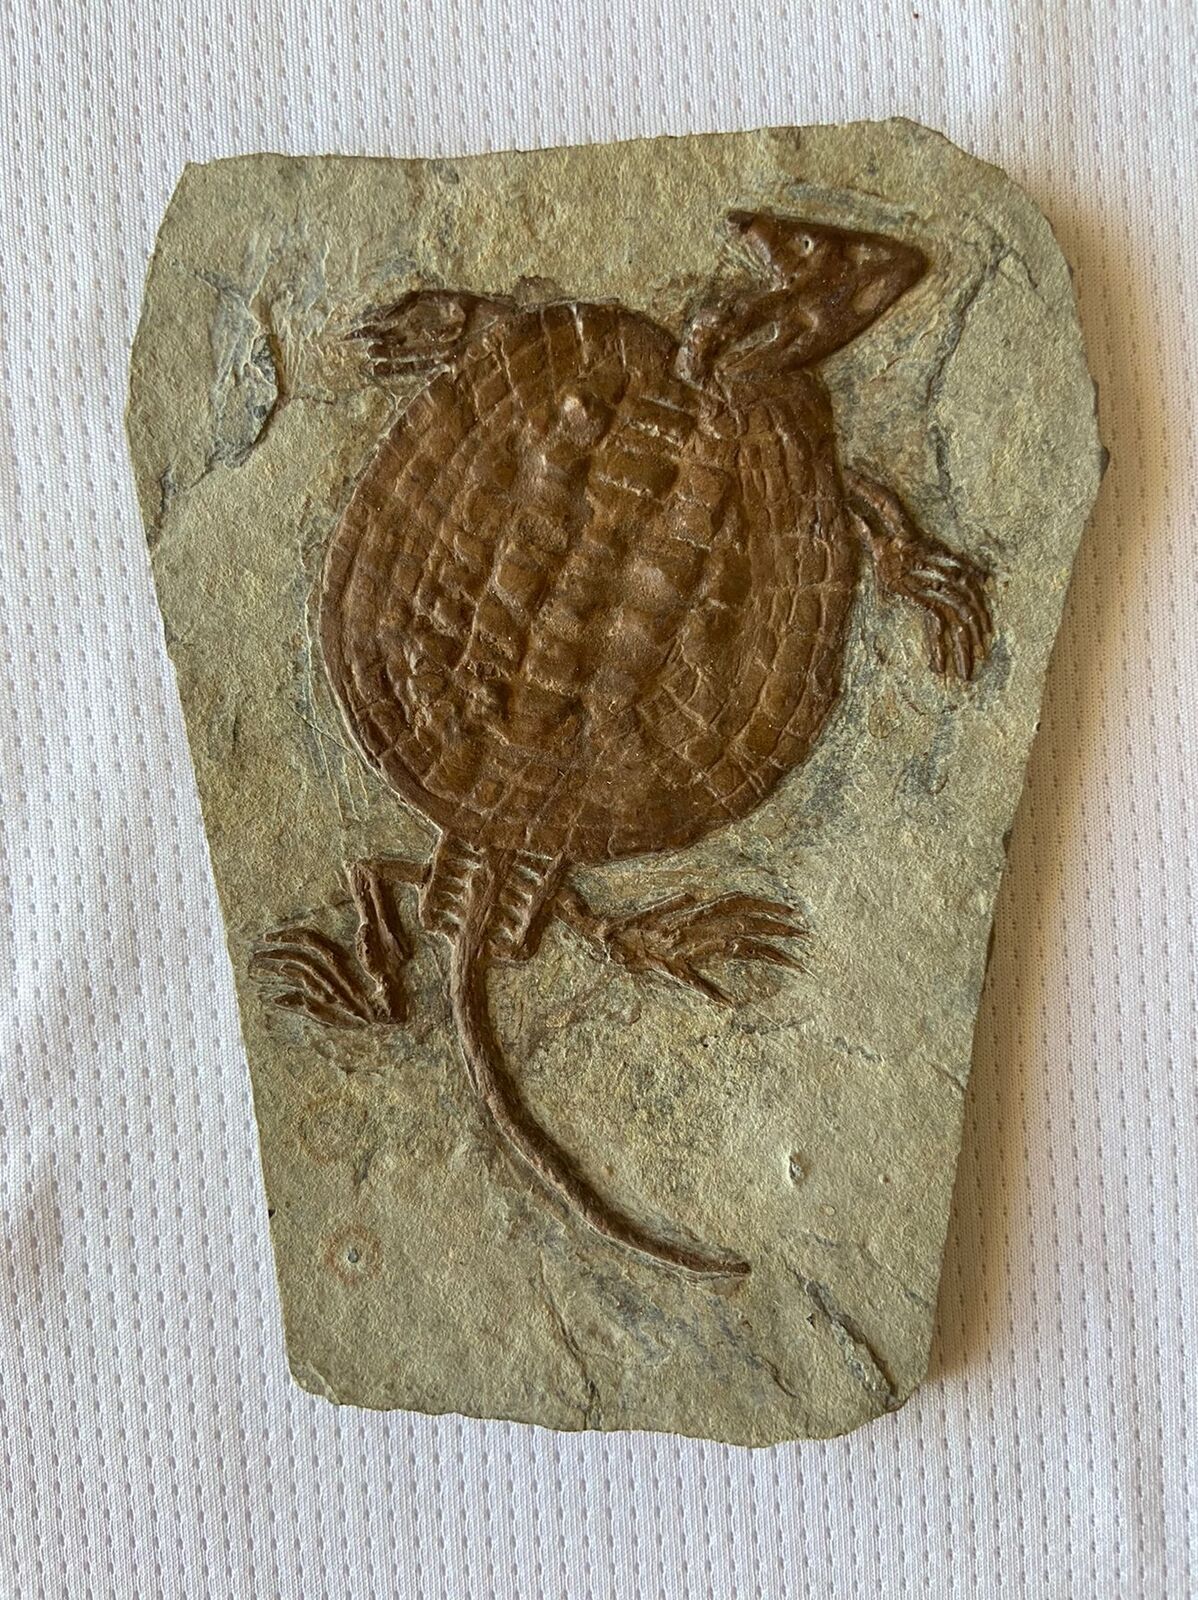 Placochelys Fossil Turtle Dinosaur Placodonts Skeleton With Skull Claws Triassic